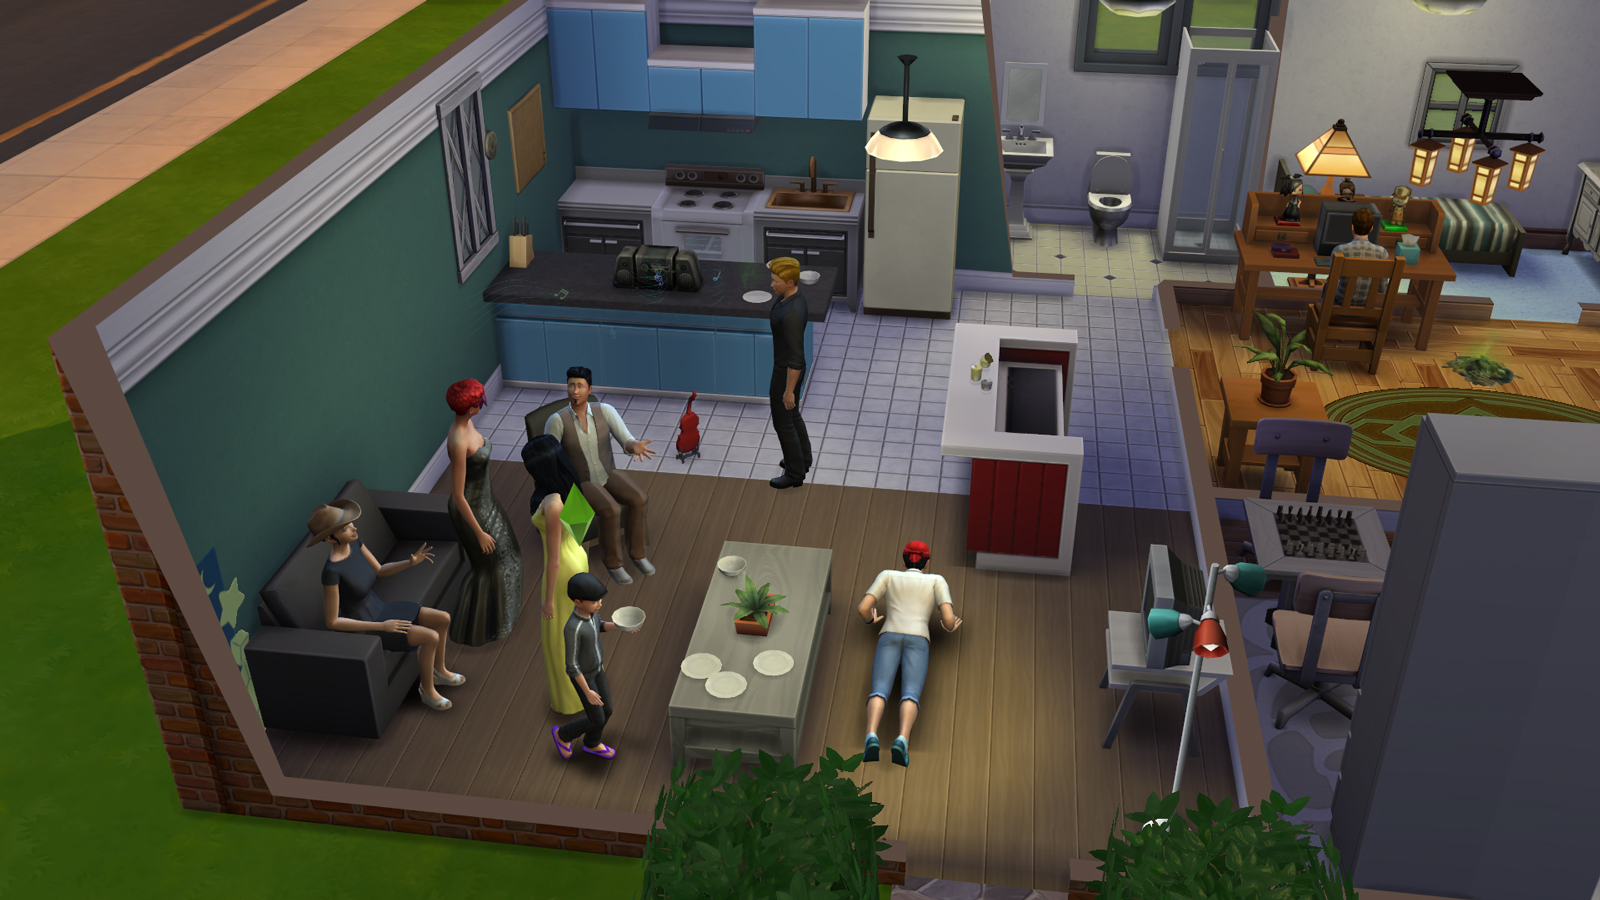 play sims 4 online for free without downloading